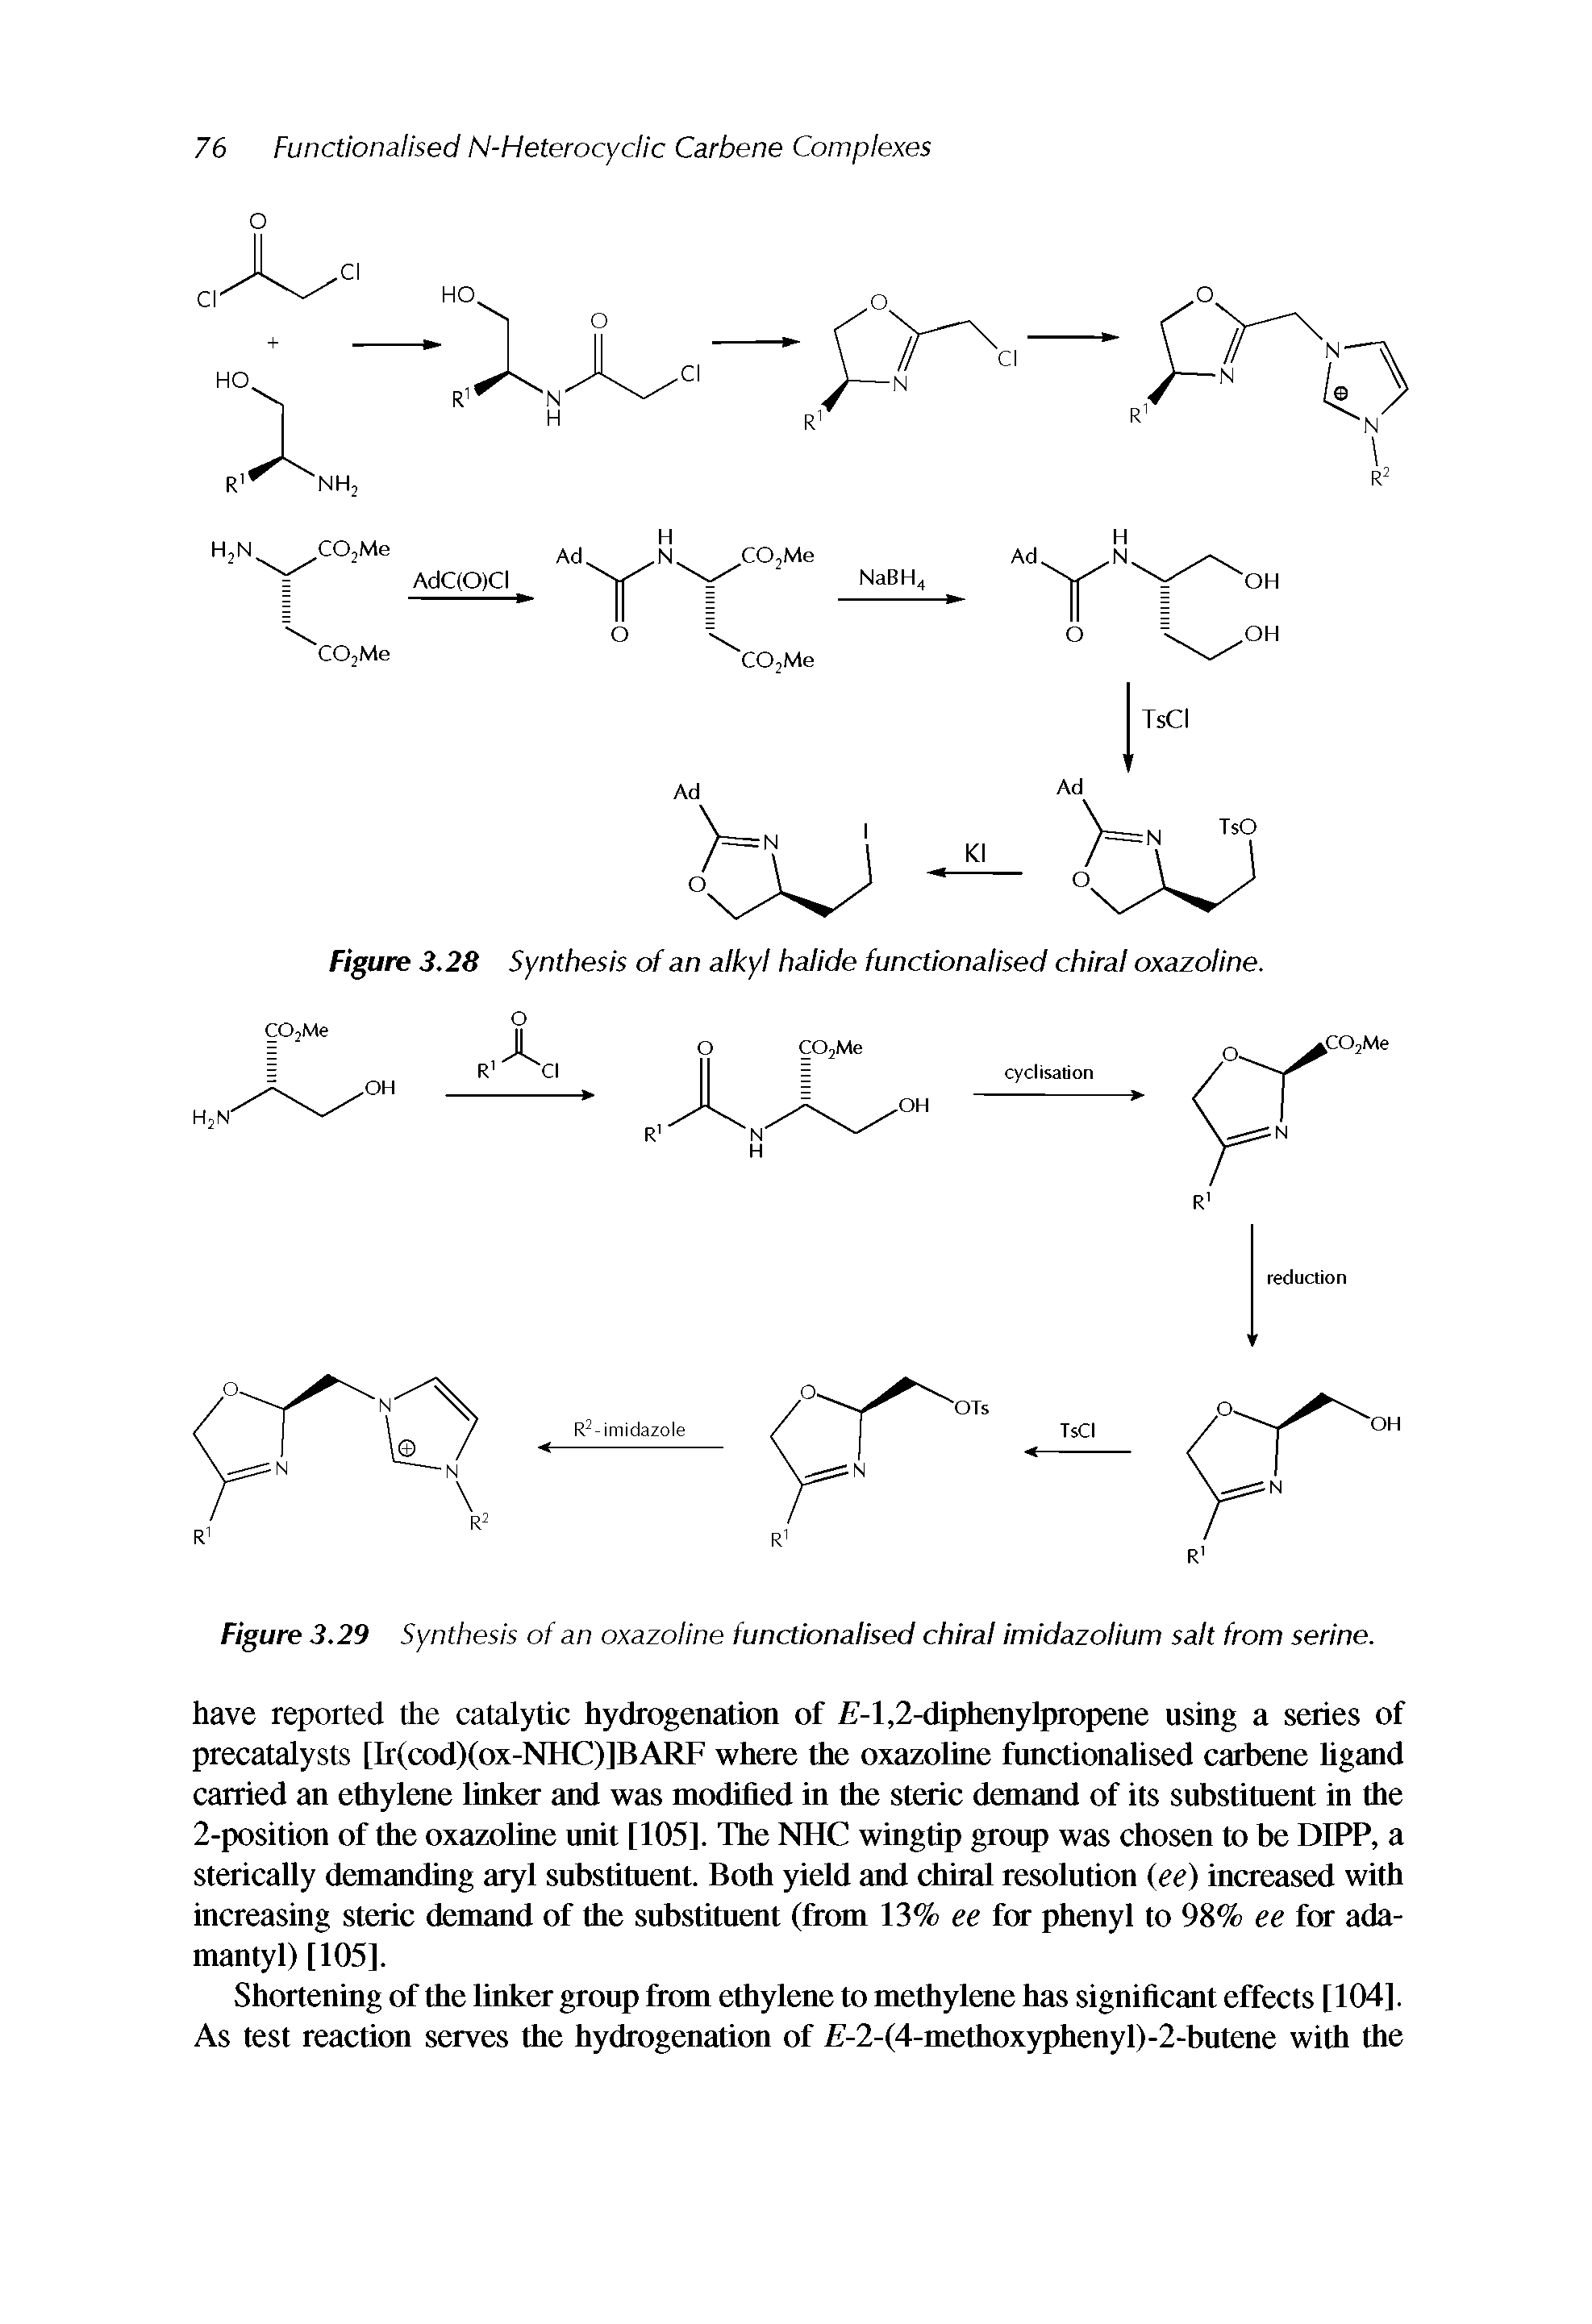 Figure 3.29 Synthesis of an oxazoline functionalised chiral imidazolium salt from serine.